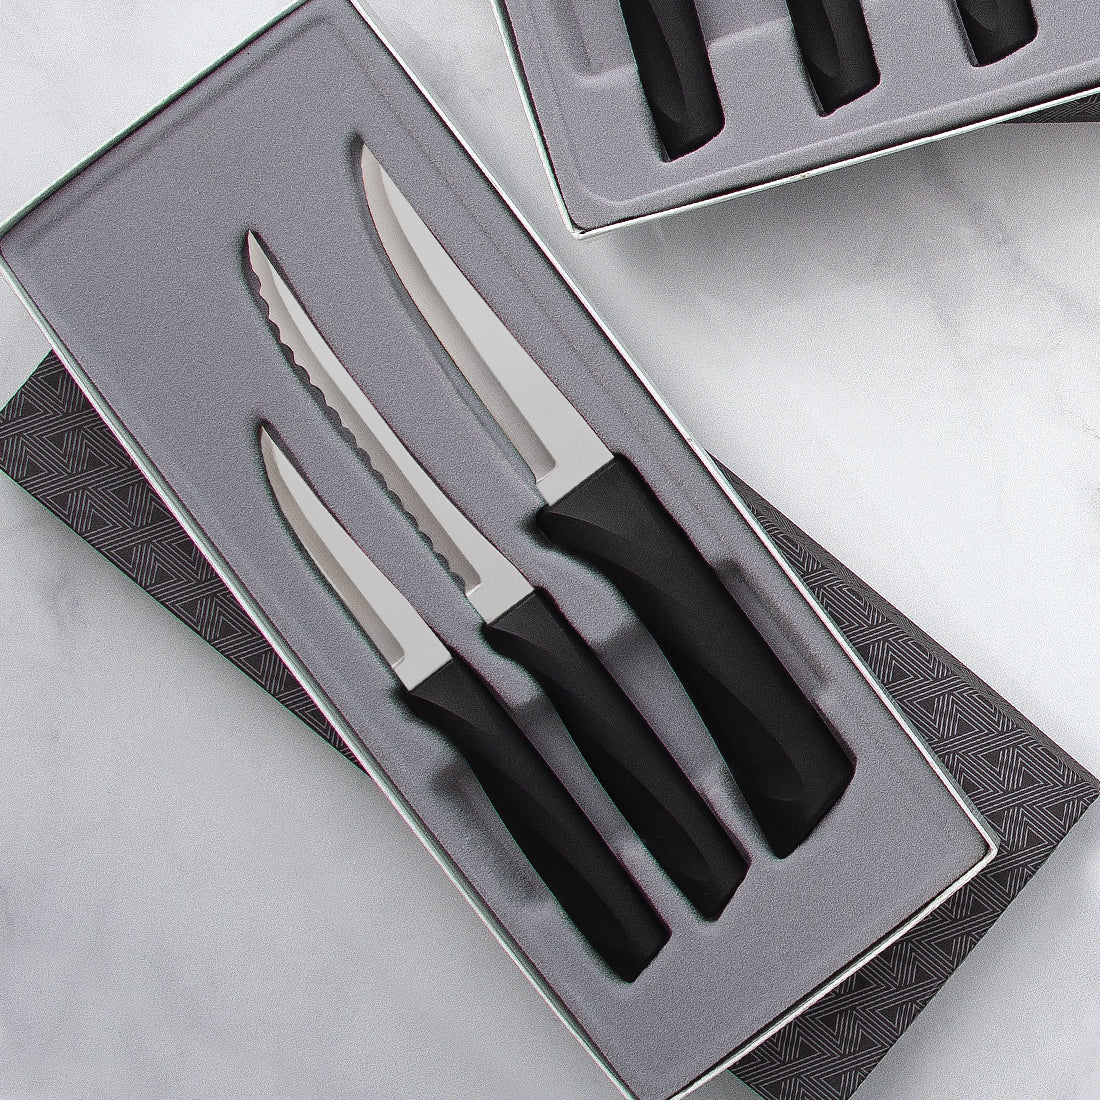 Rada Cutlery Meal Prep 4-Piece Paring Knife Gift Set – Stainless